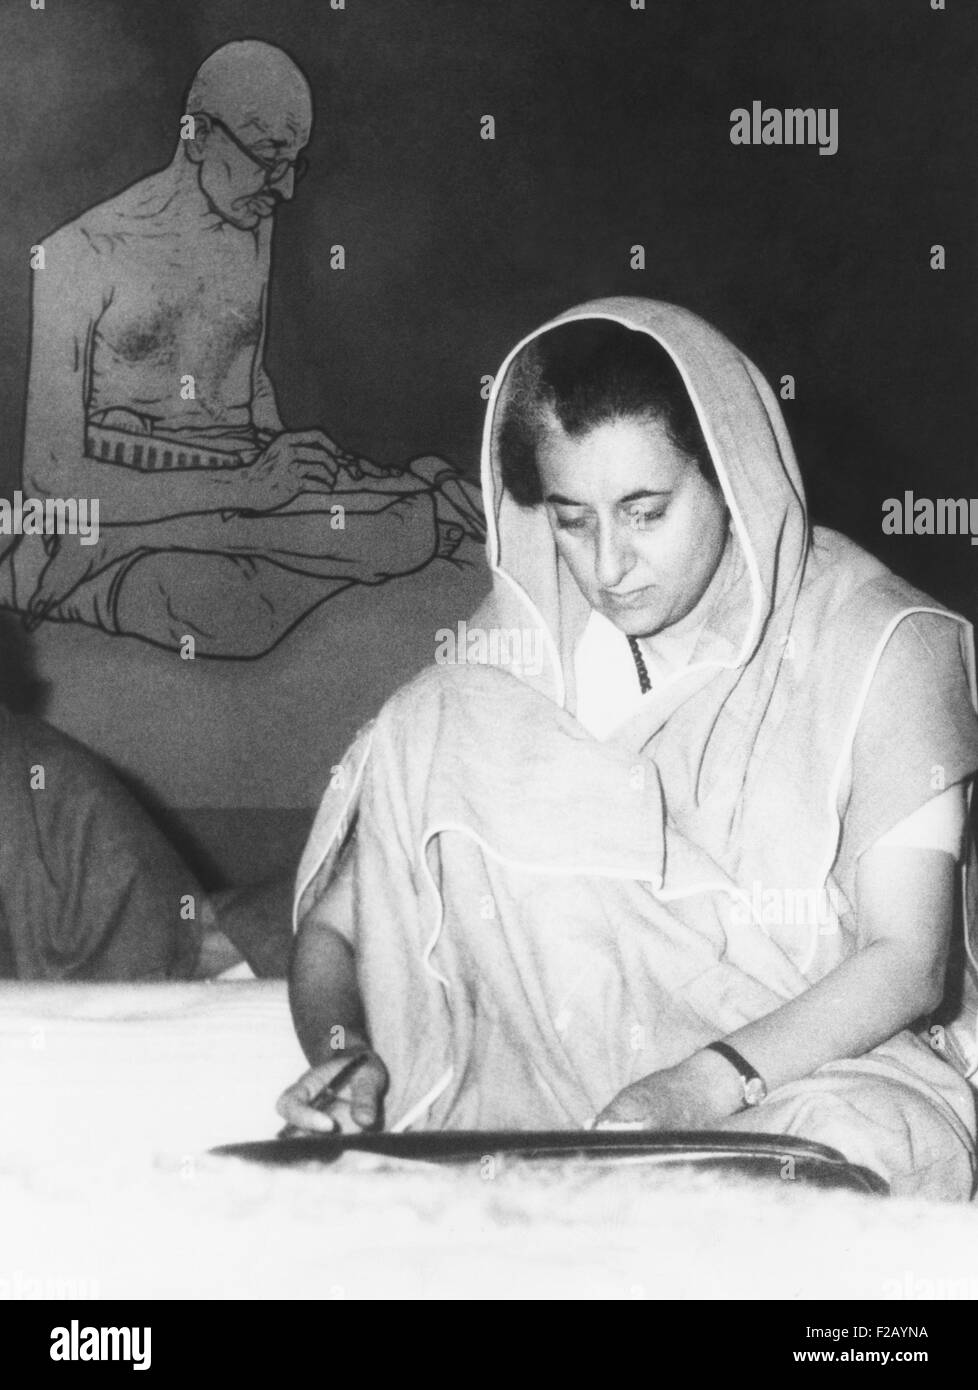 Indian Prime Minister Indira Gandhi during the annual session of the ruling Congress Party. Feb. 2, 1966. Seated on the floor, she meets her fellow countryman in the style of Mahatma Gandhi, pictured behind her. (CSU 2015 9 728) Stock Photo